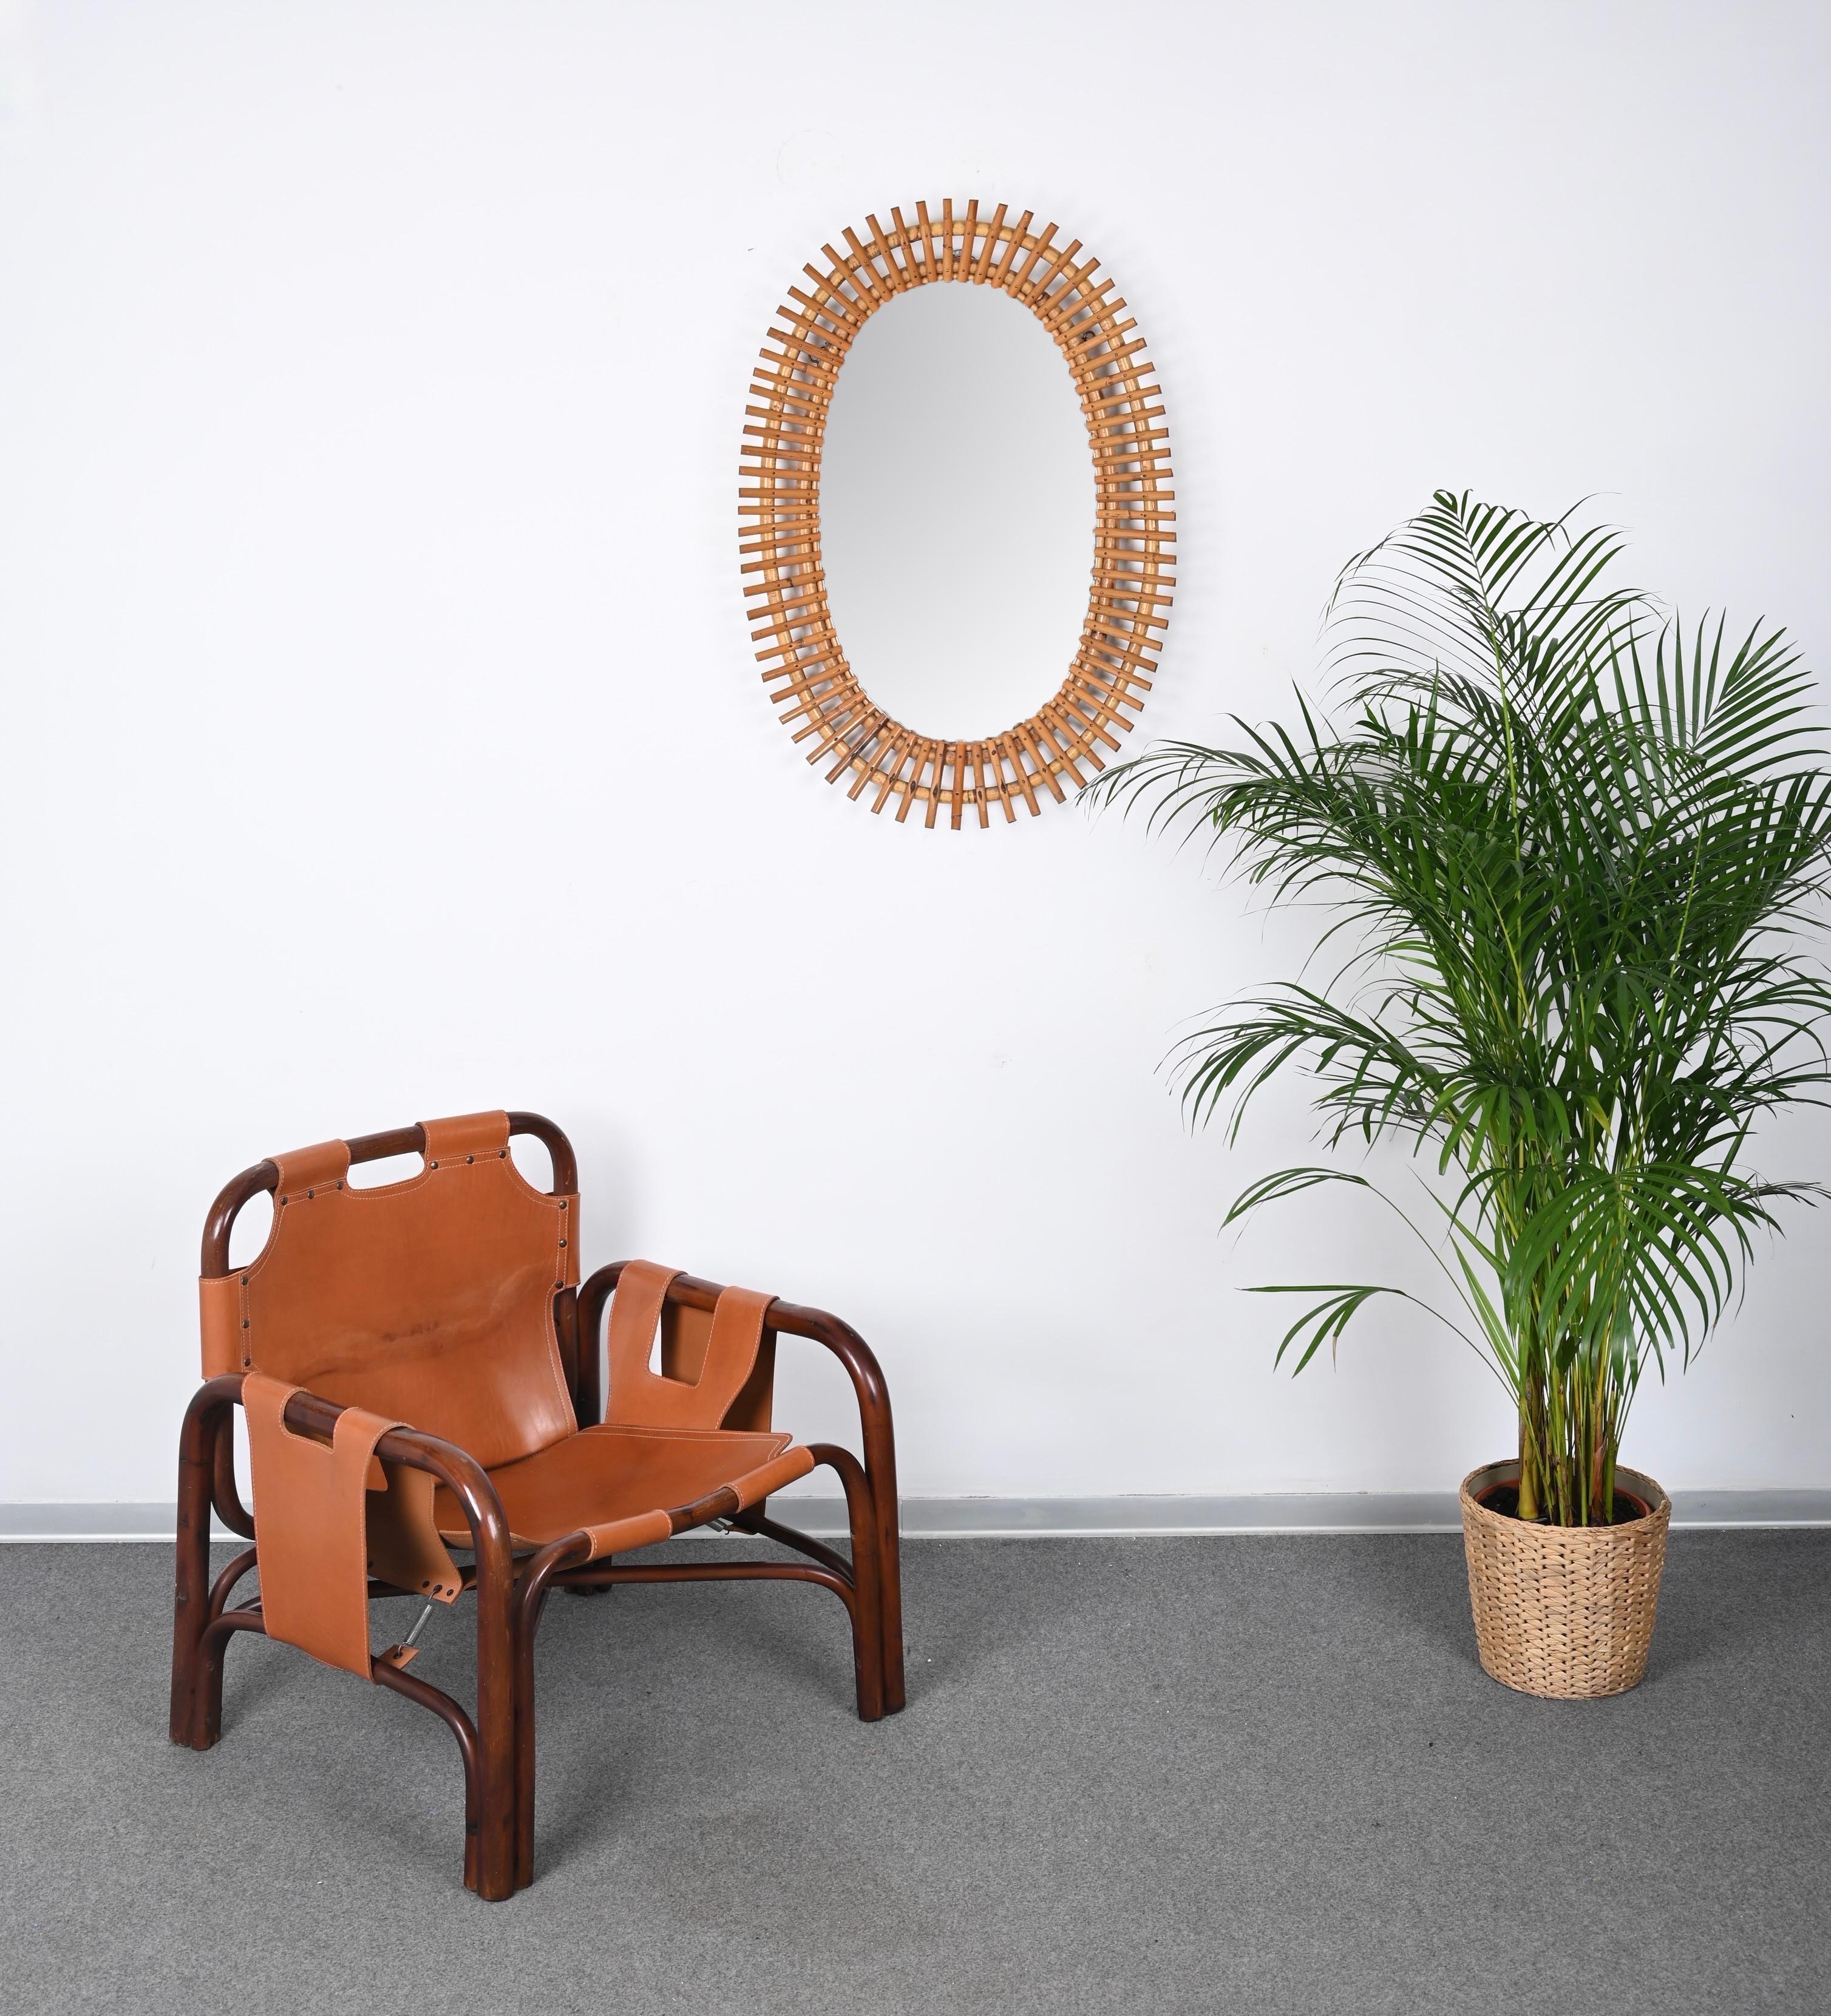 Gorgeous large oval mirror in bamboo and rattan. This fantastic item was realized in Italy in the 1960s. 

This stunning mirror features a triple convex oval frame in curved bamboo crossed by small bamboo inserts.
It has the unmistakable design